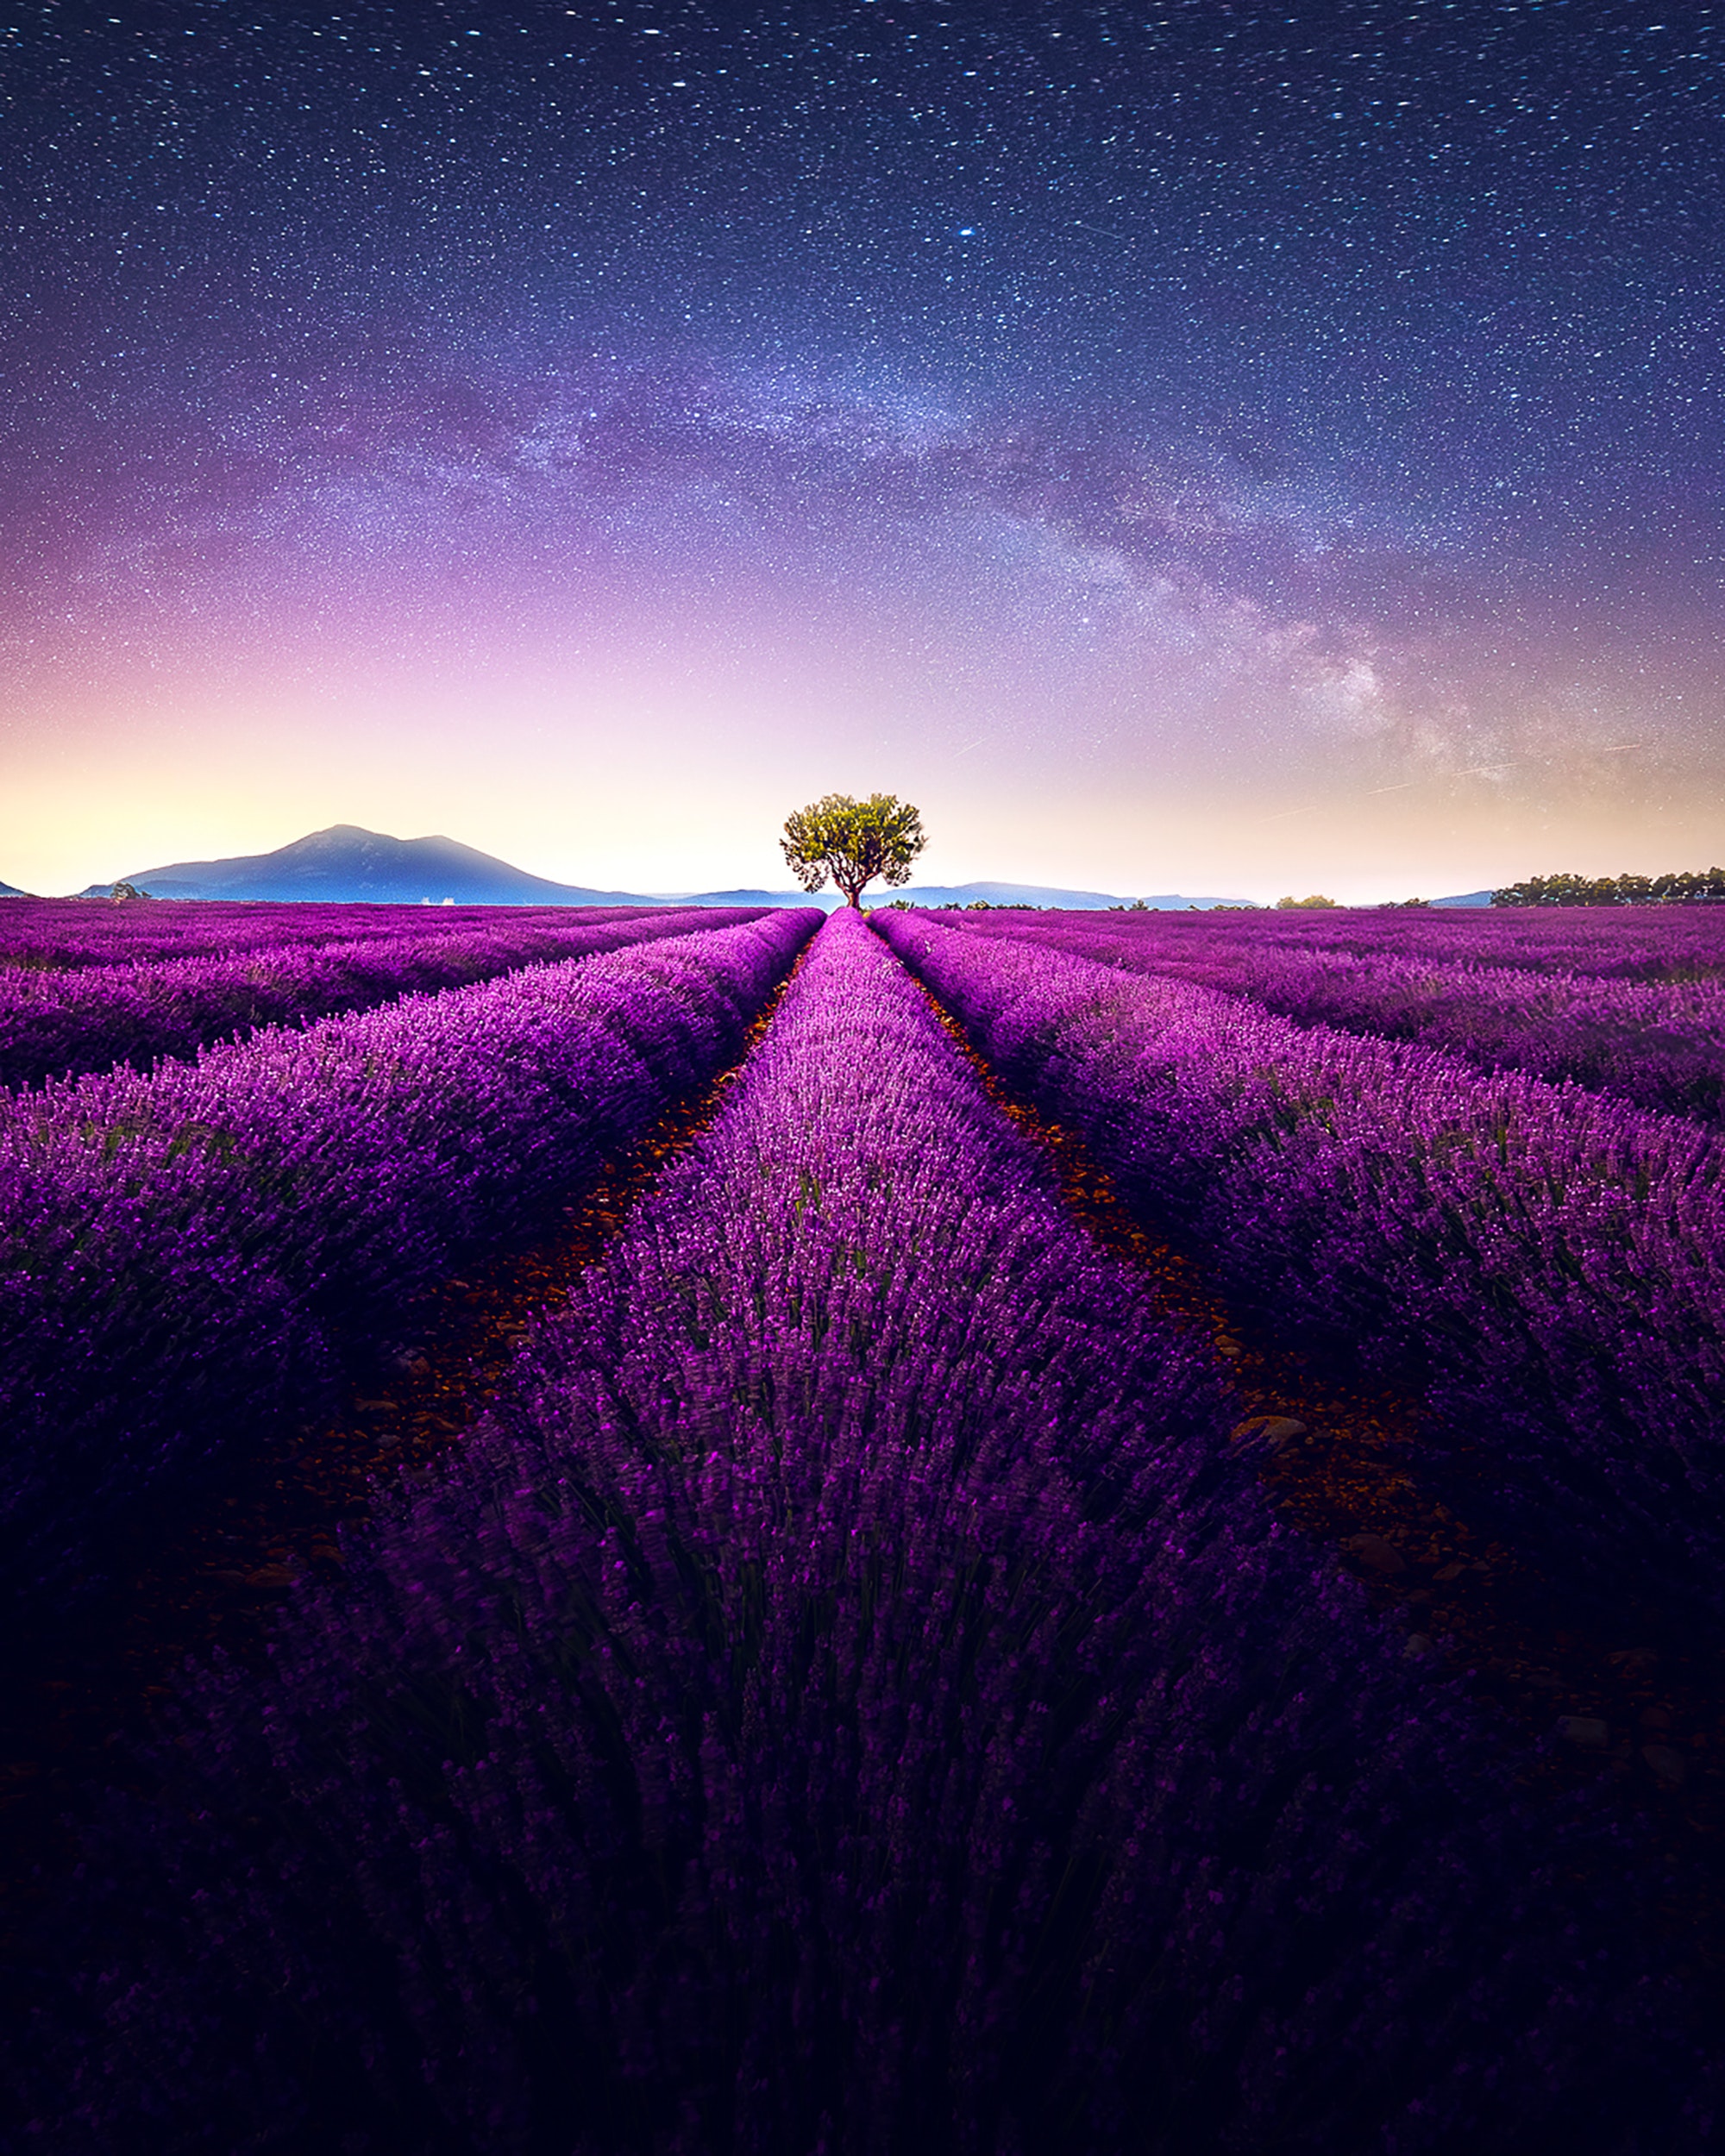 image of a lavander field with a distant tree.